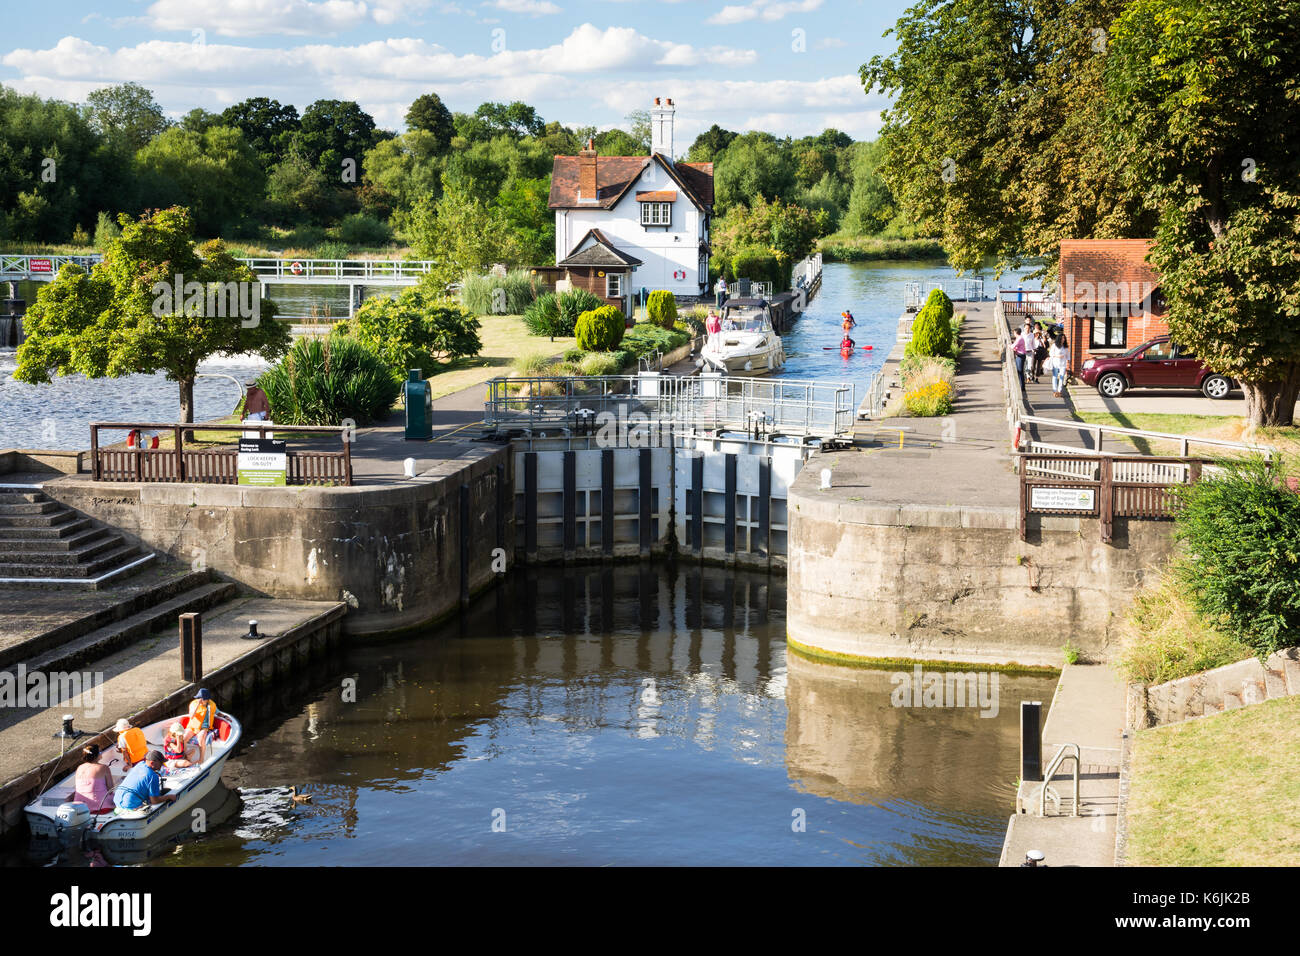 Reading, England, UK - August 29, 2016: The weir and lock on the River Thames at Goring in Berkshire. Stock Photo